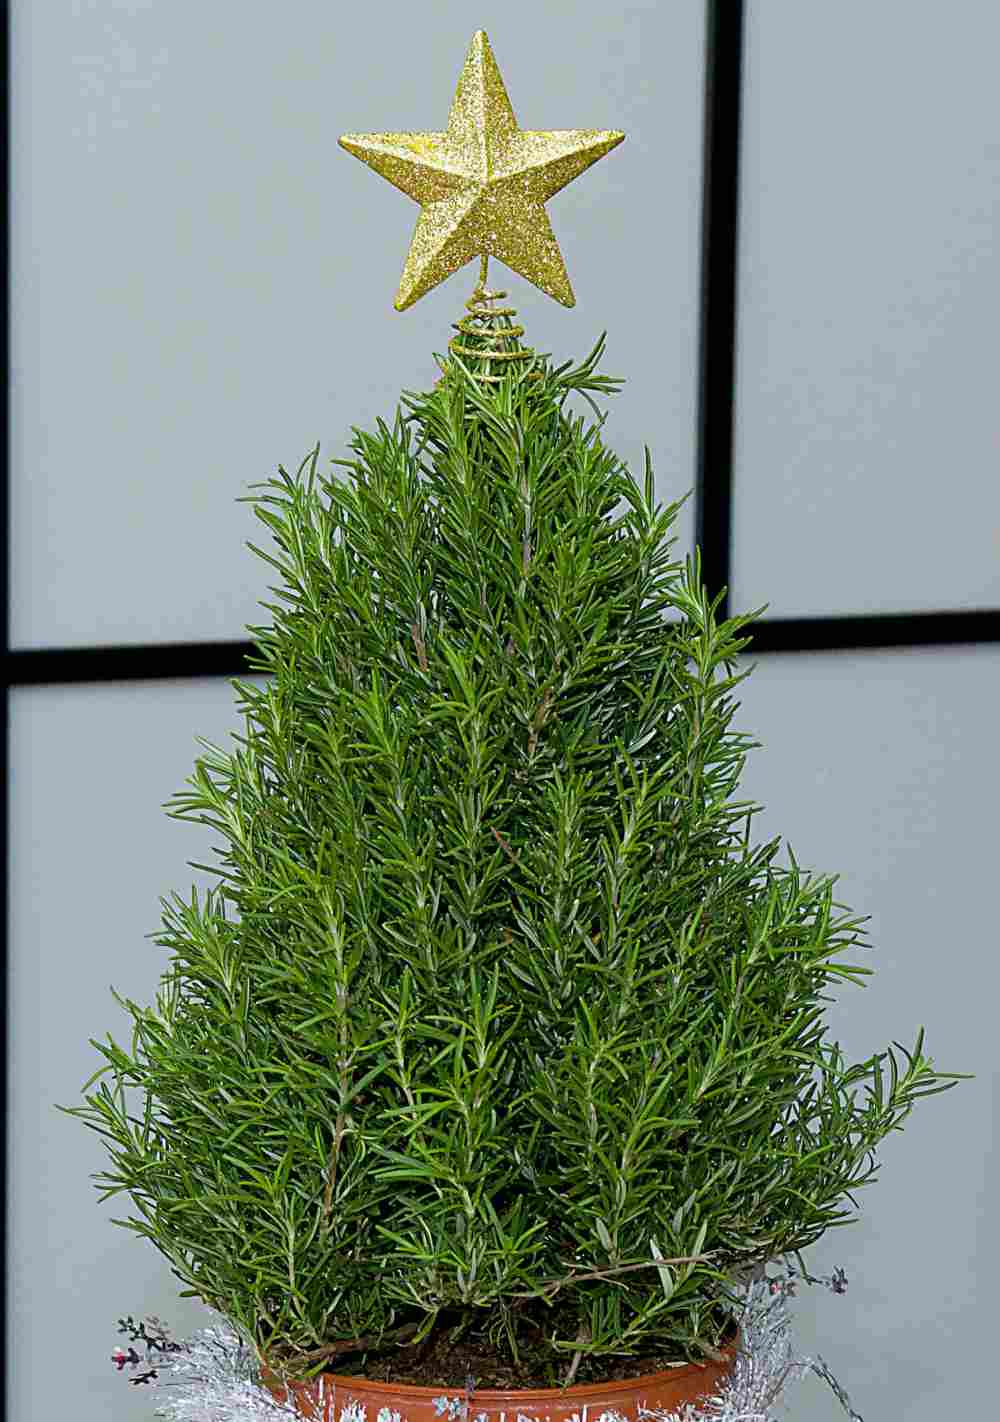 Rosemary plant shaped like a Christmas tree with star on the top.